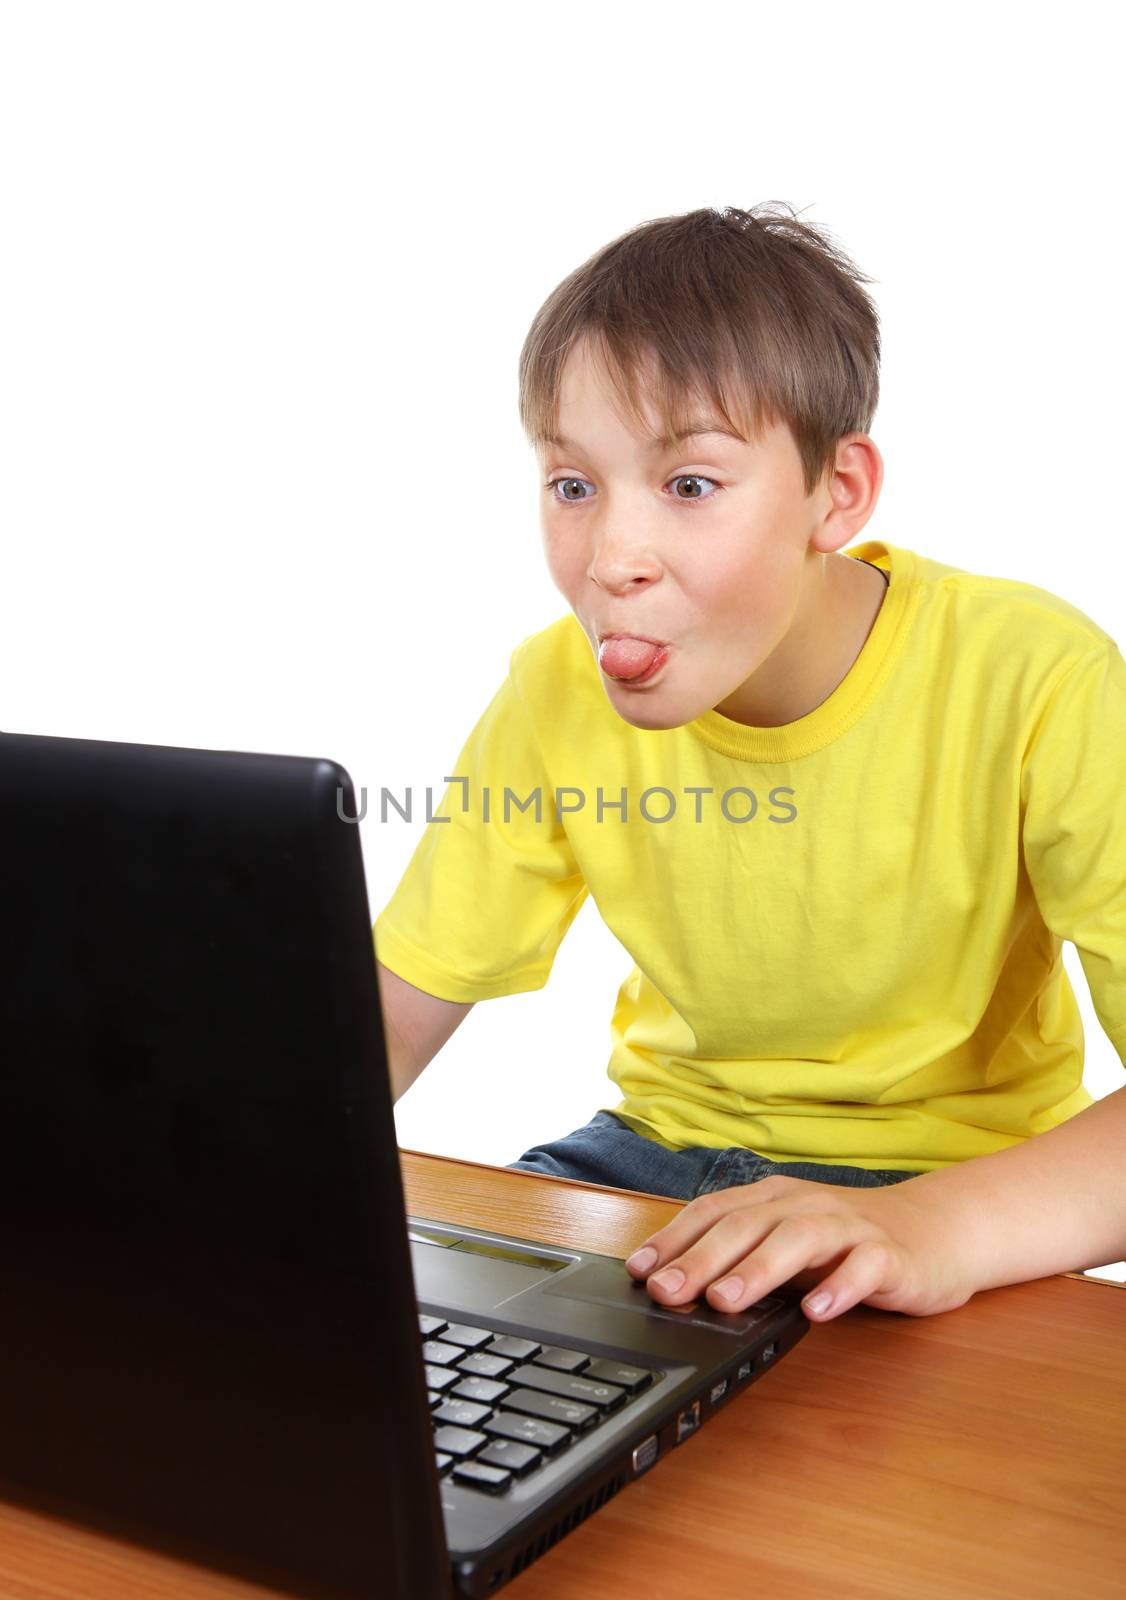 Kid at the Desk with Laptop showing a Tongue in Display on the White Background